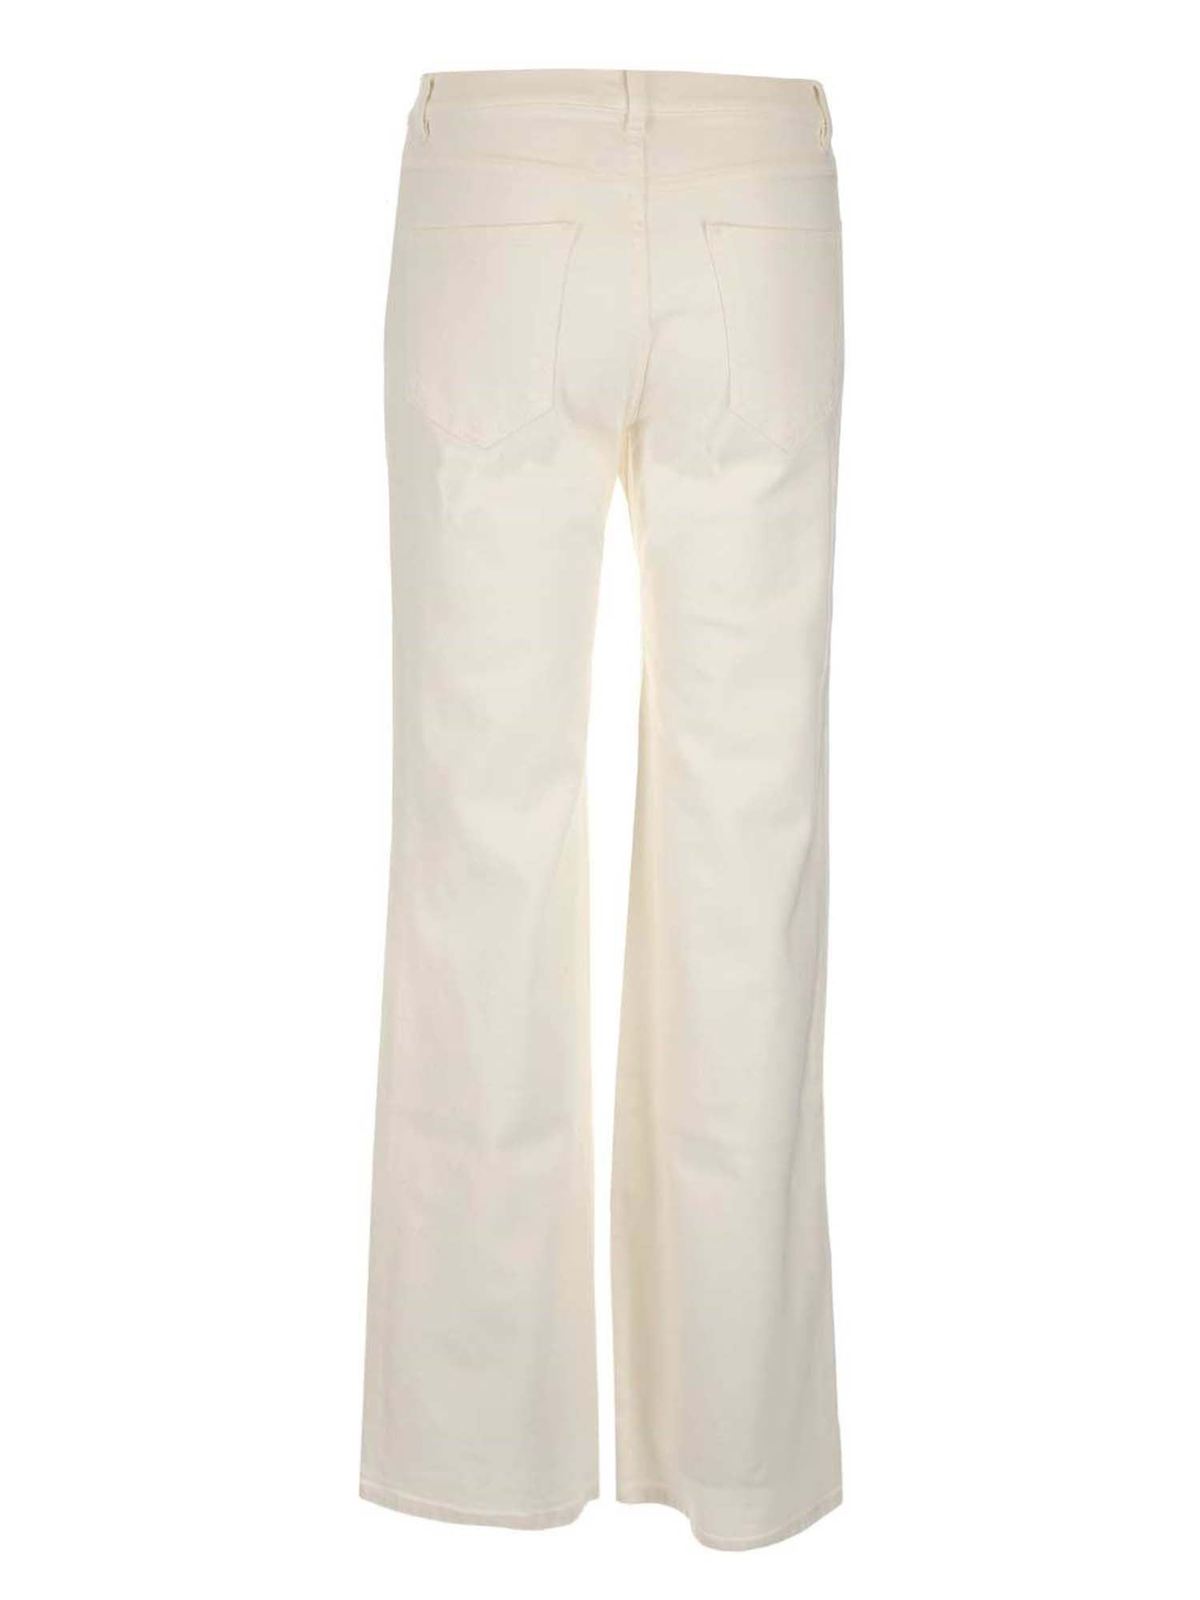 Flared jeans P.A.R.O.S.H. - Flared jeans in white - CABAREXYD231182002